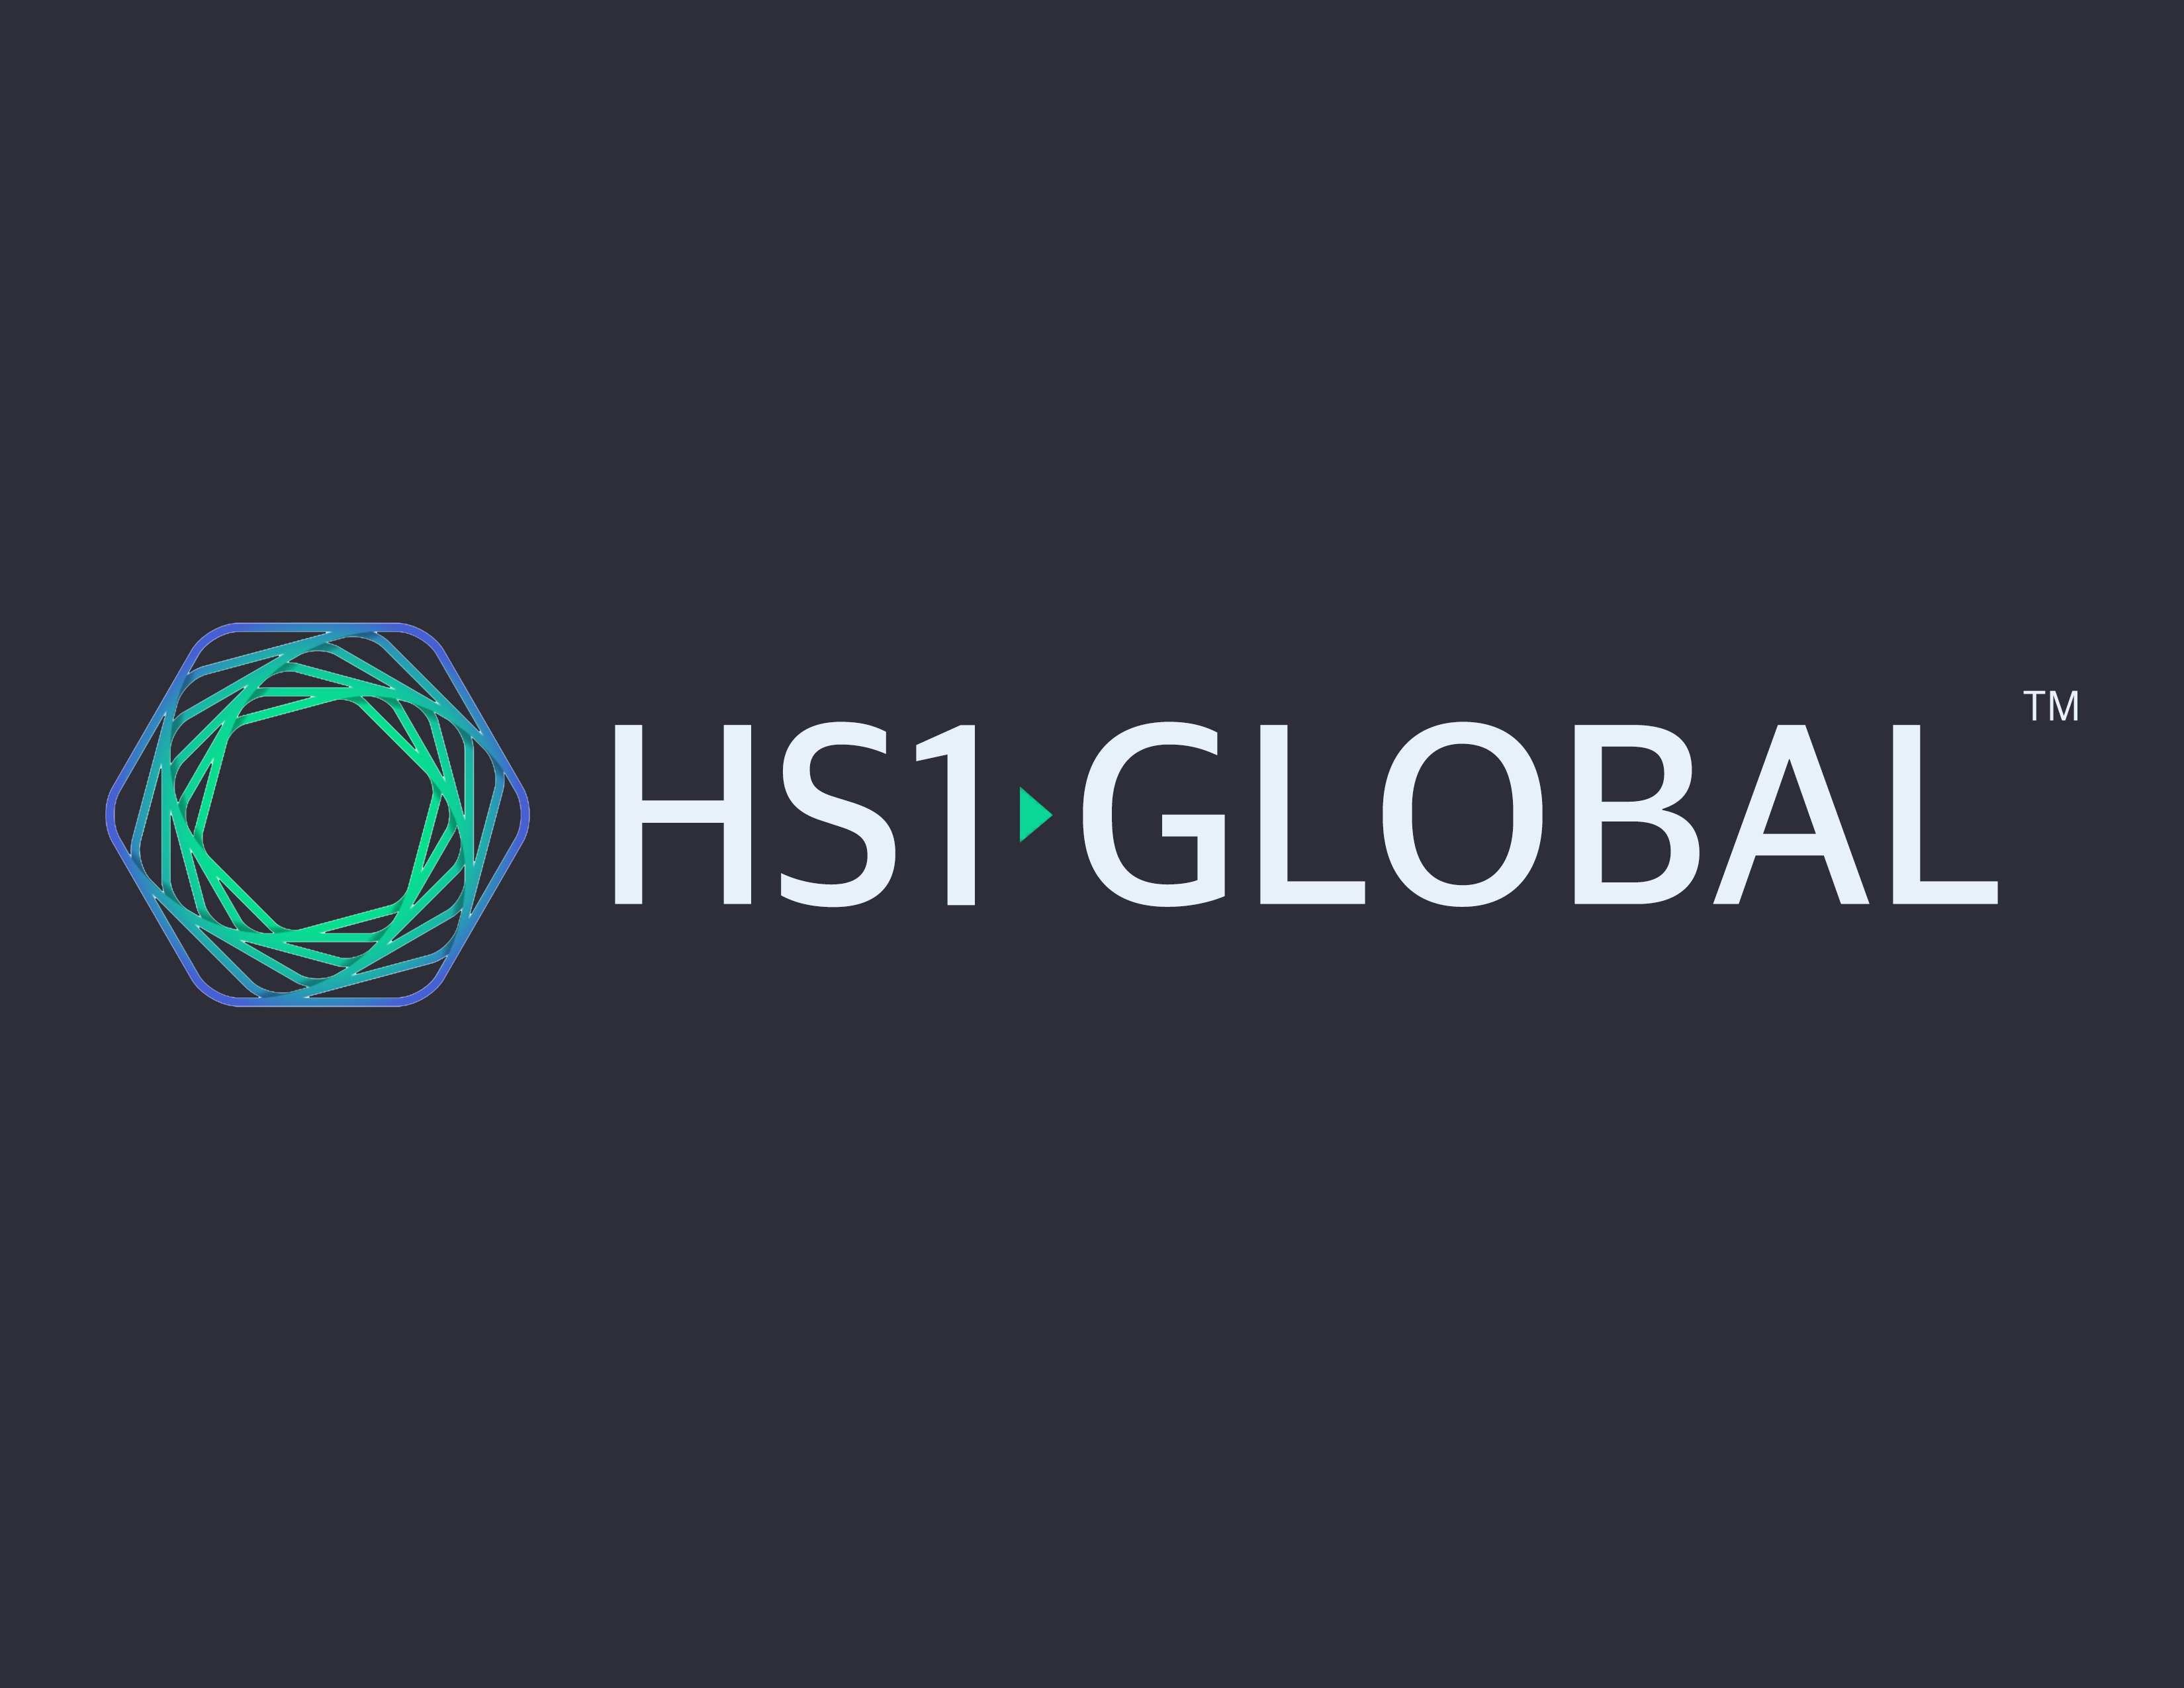 official text logo of hs1global corporate